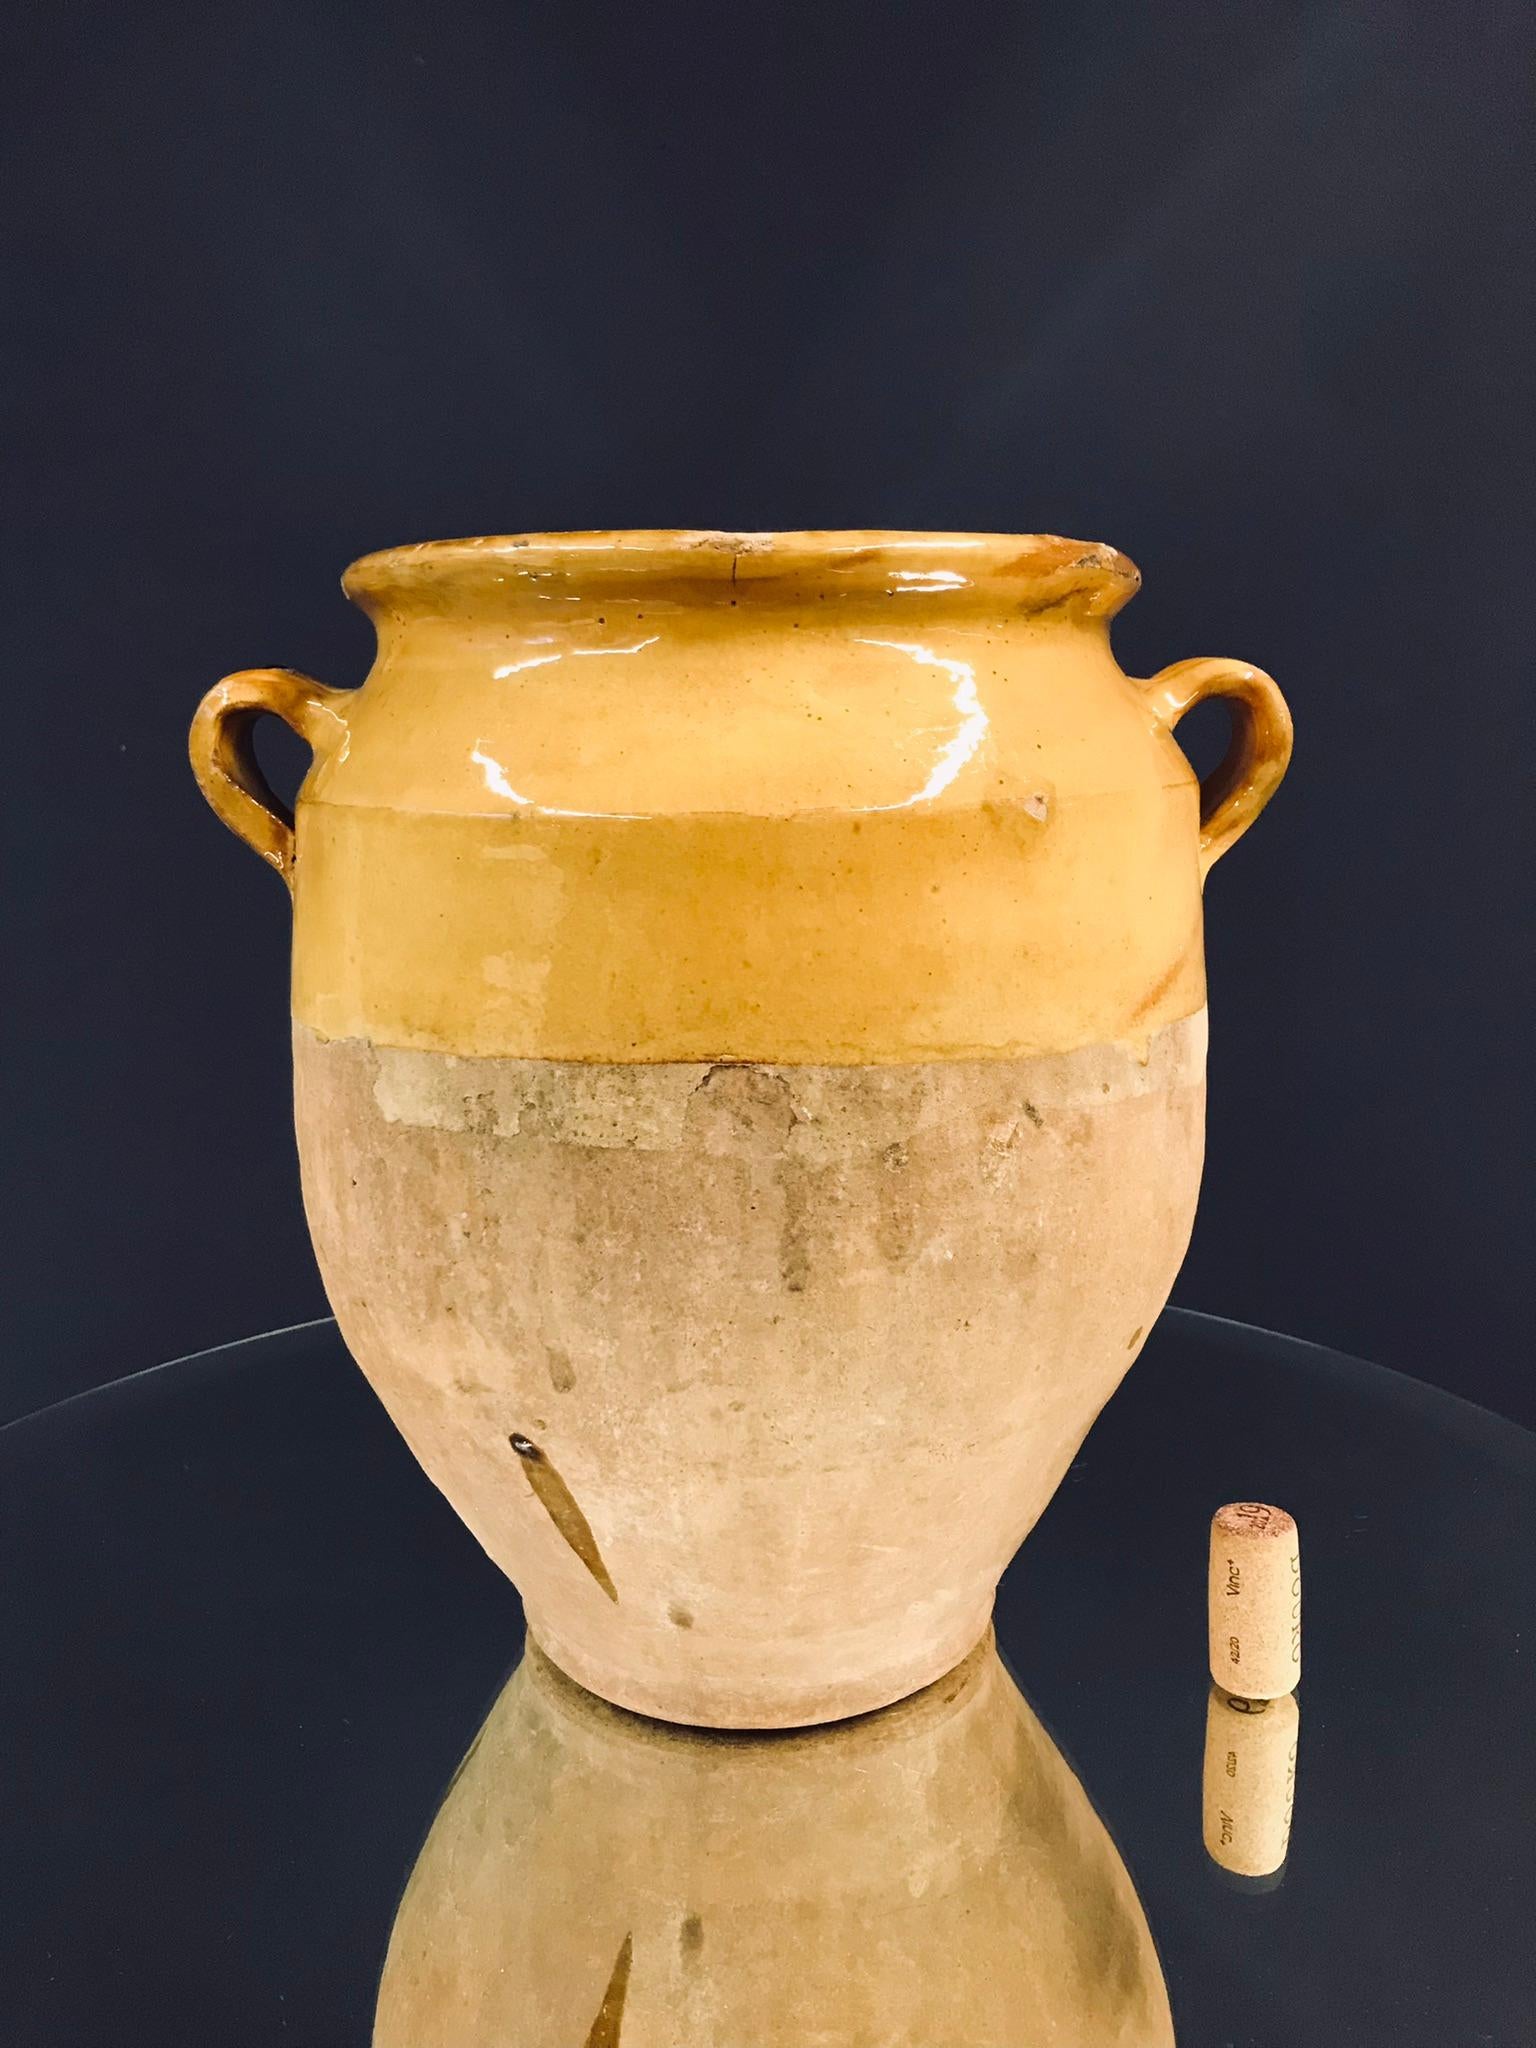 Beautiful small confit jar with its characteristic yellow glaze.
Confit jars were used primarily in the South of France for the preservation of meats such as duck or goose for dishes such as cassoulet or foie gras. The bottom halves were left